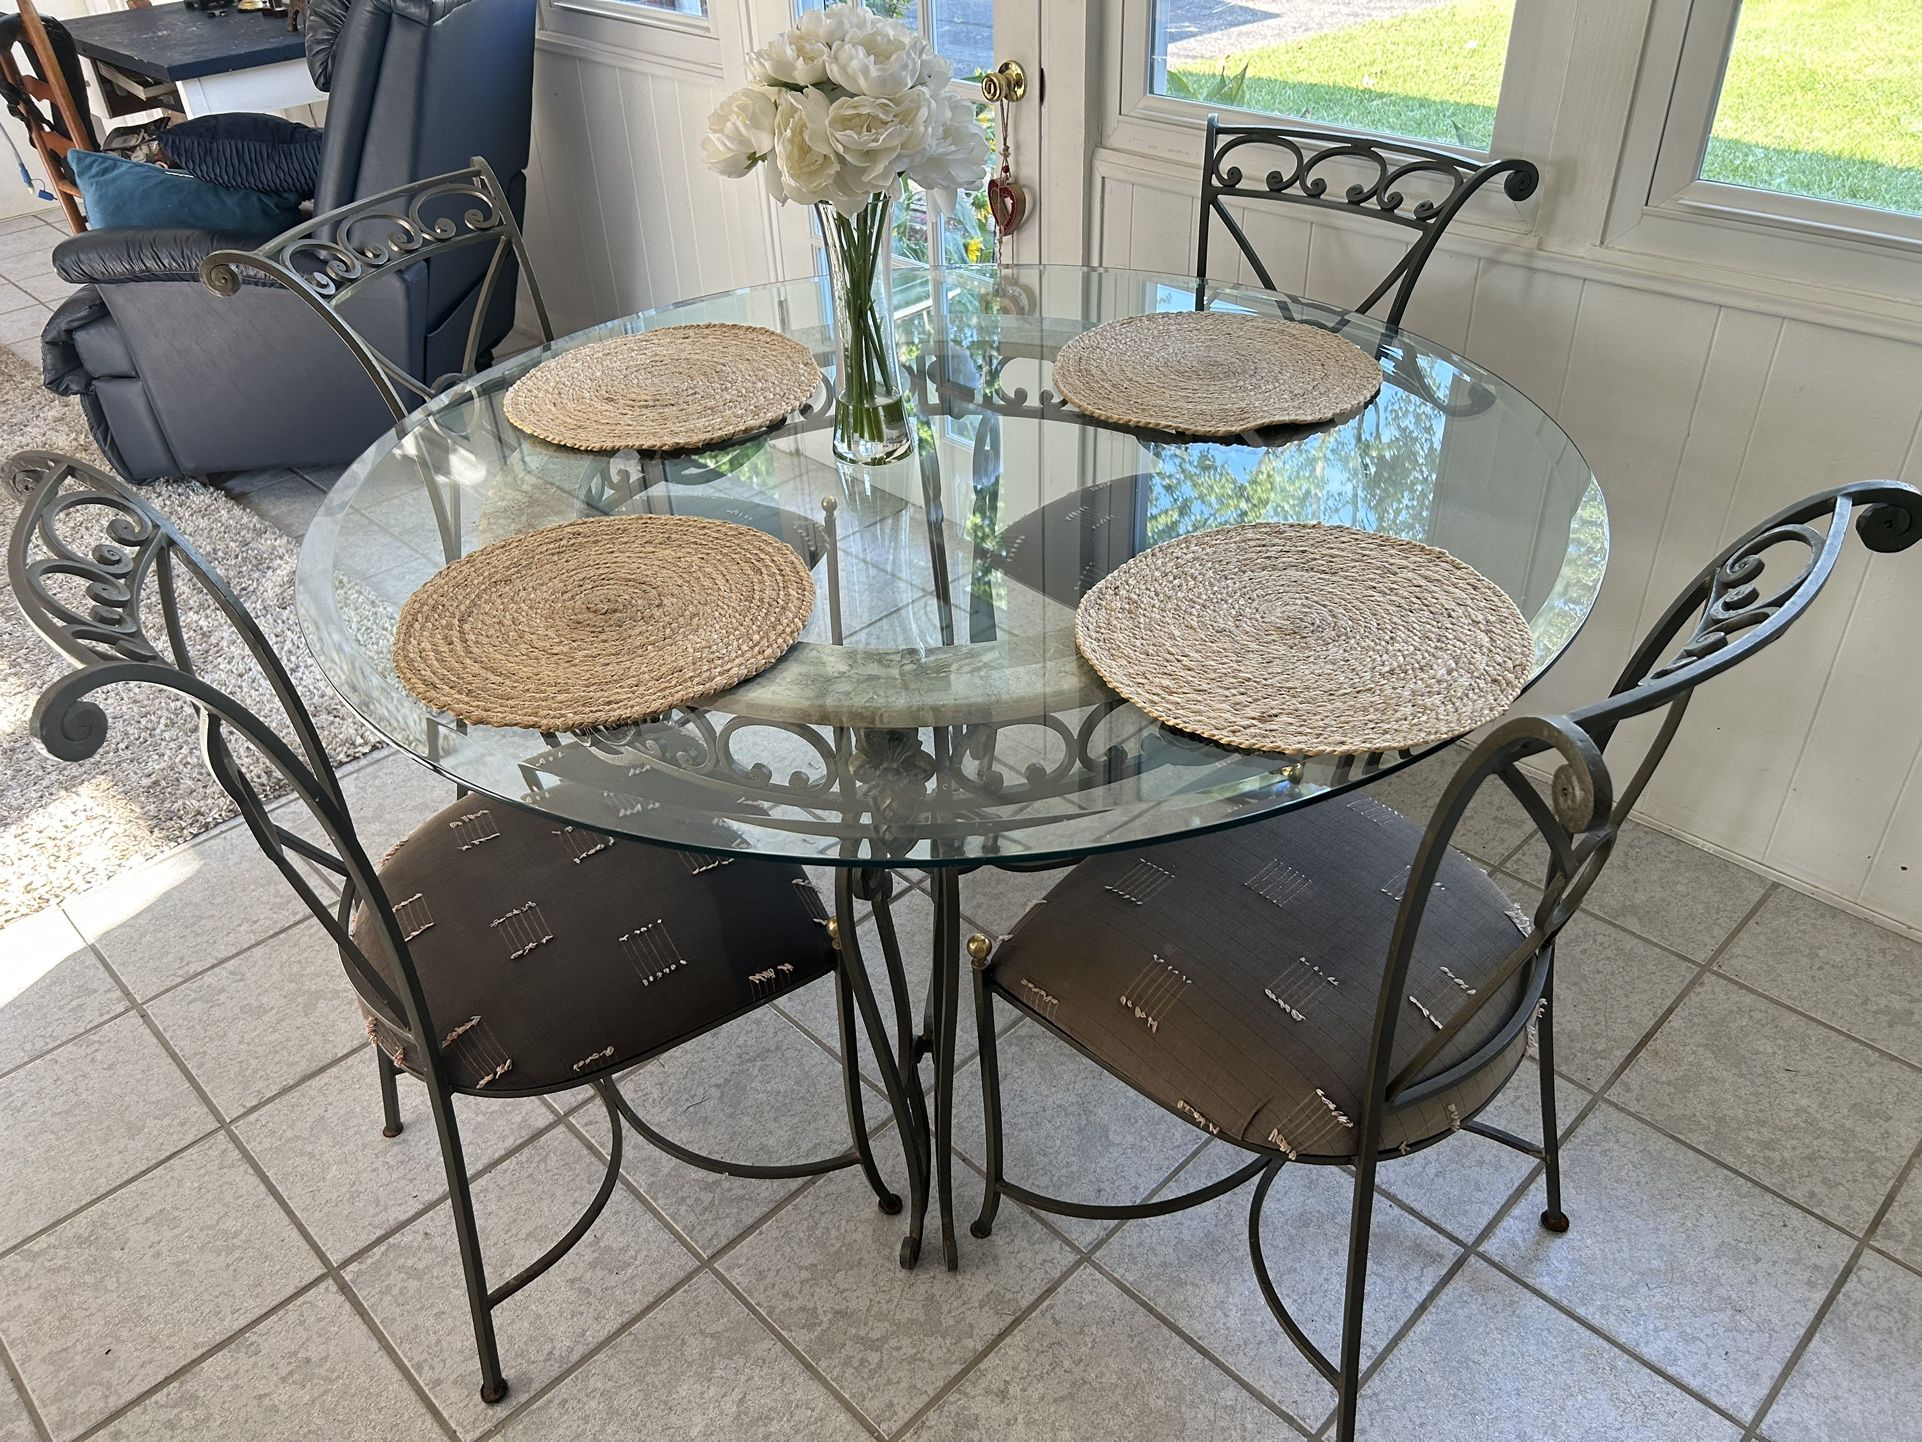 Glass Top Dining Room Table & Chairs 